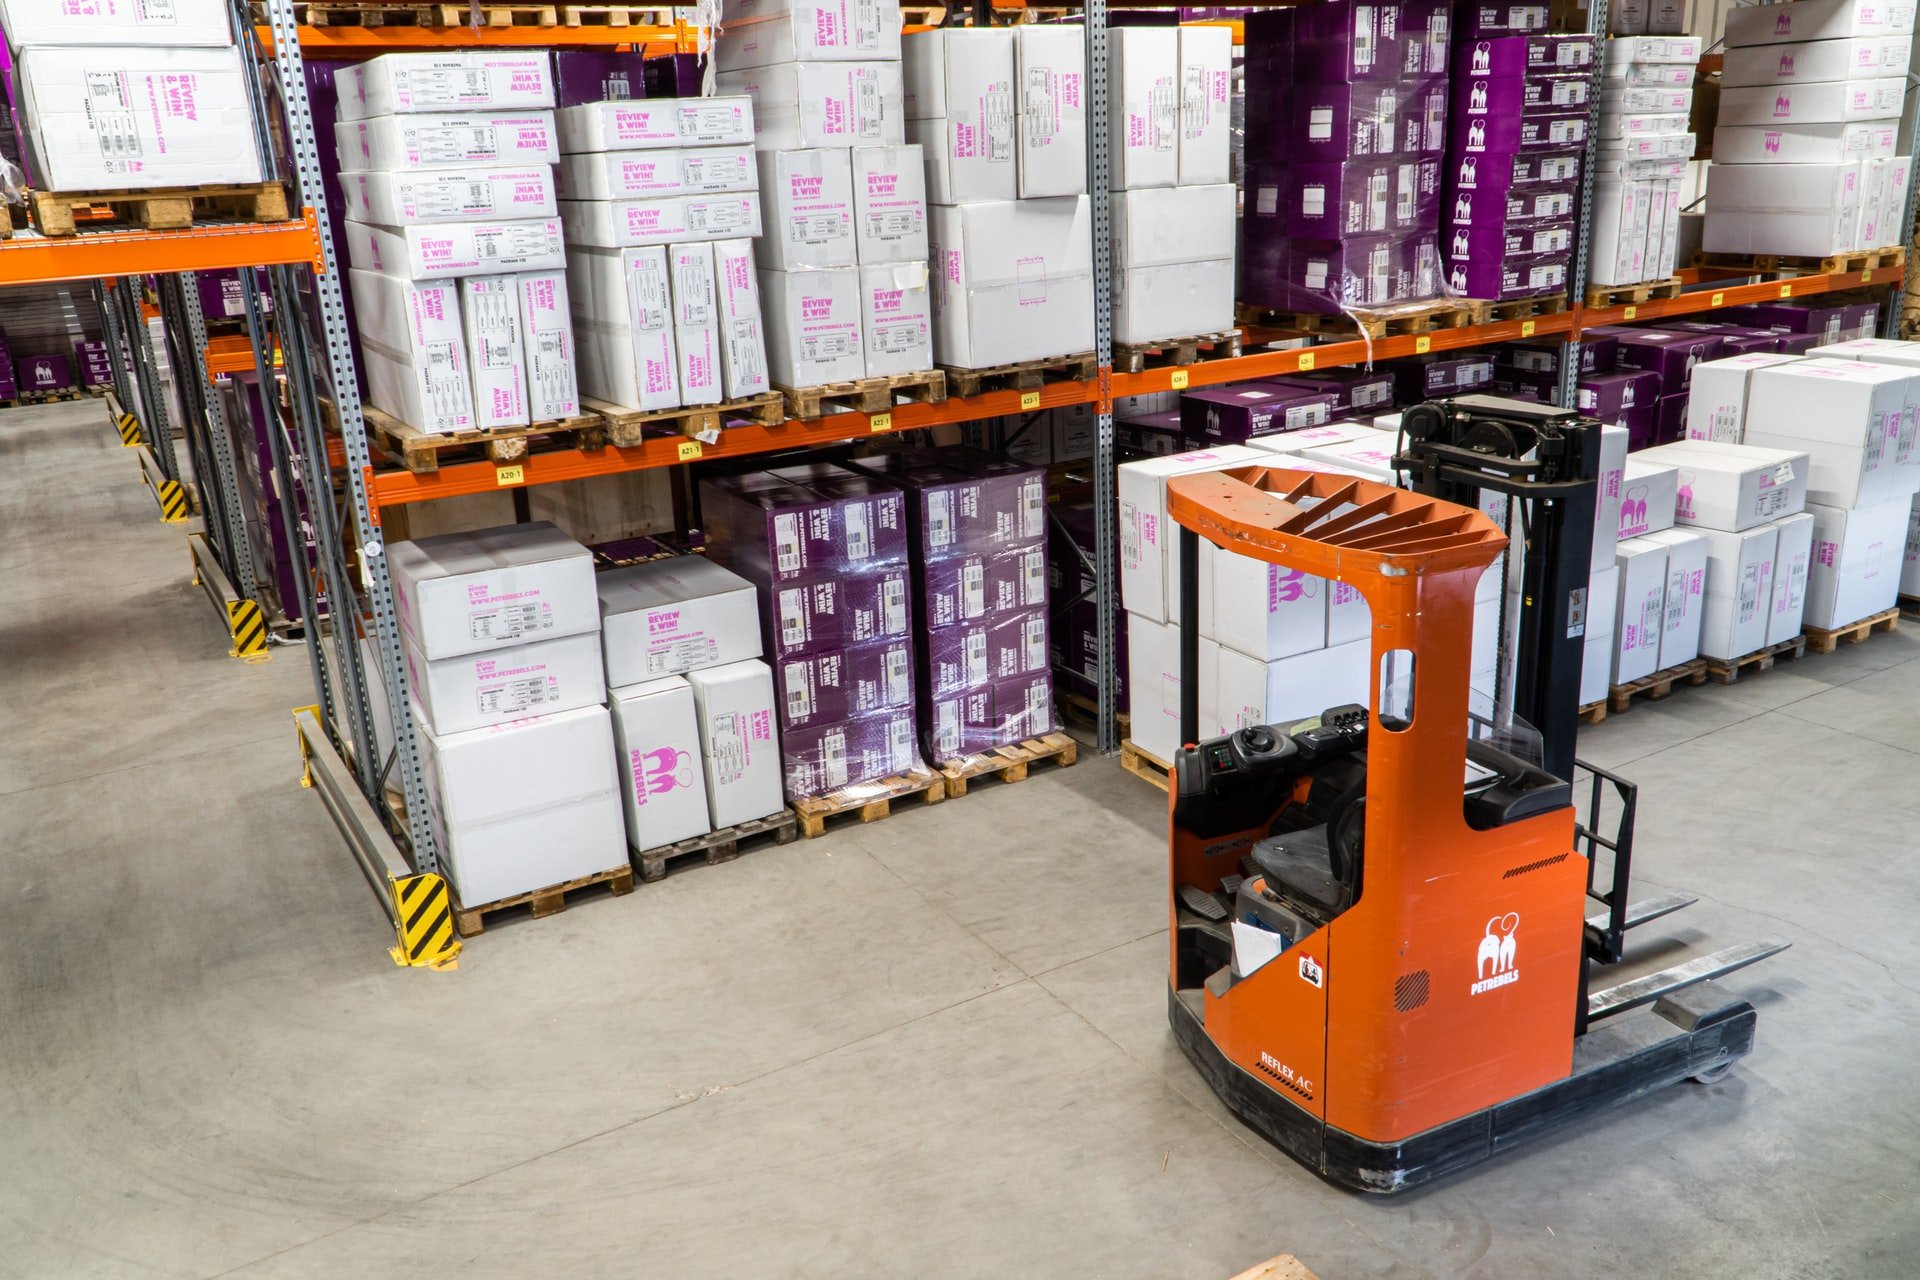 Manual forklifts can cost more than automated vehicles over time